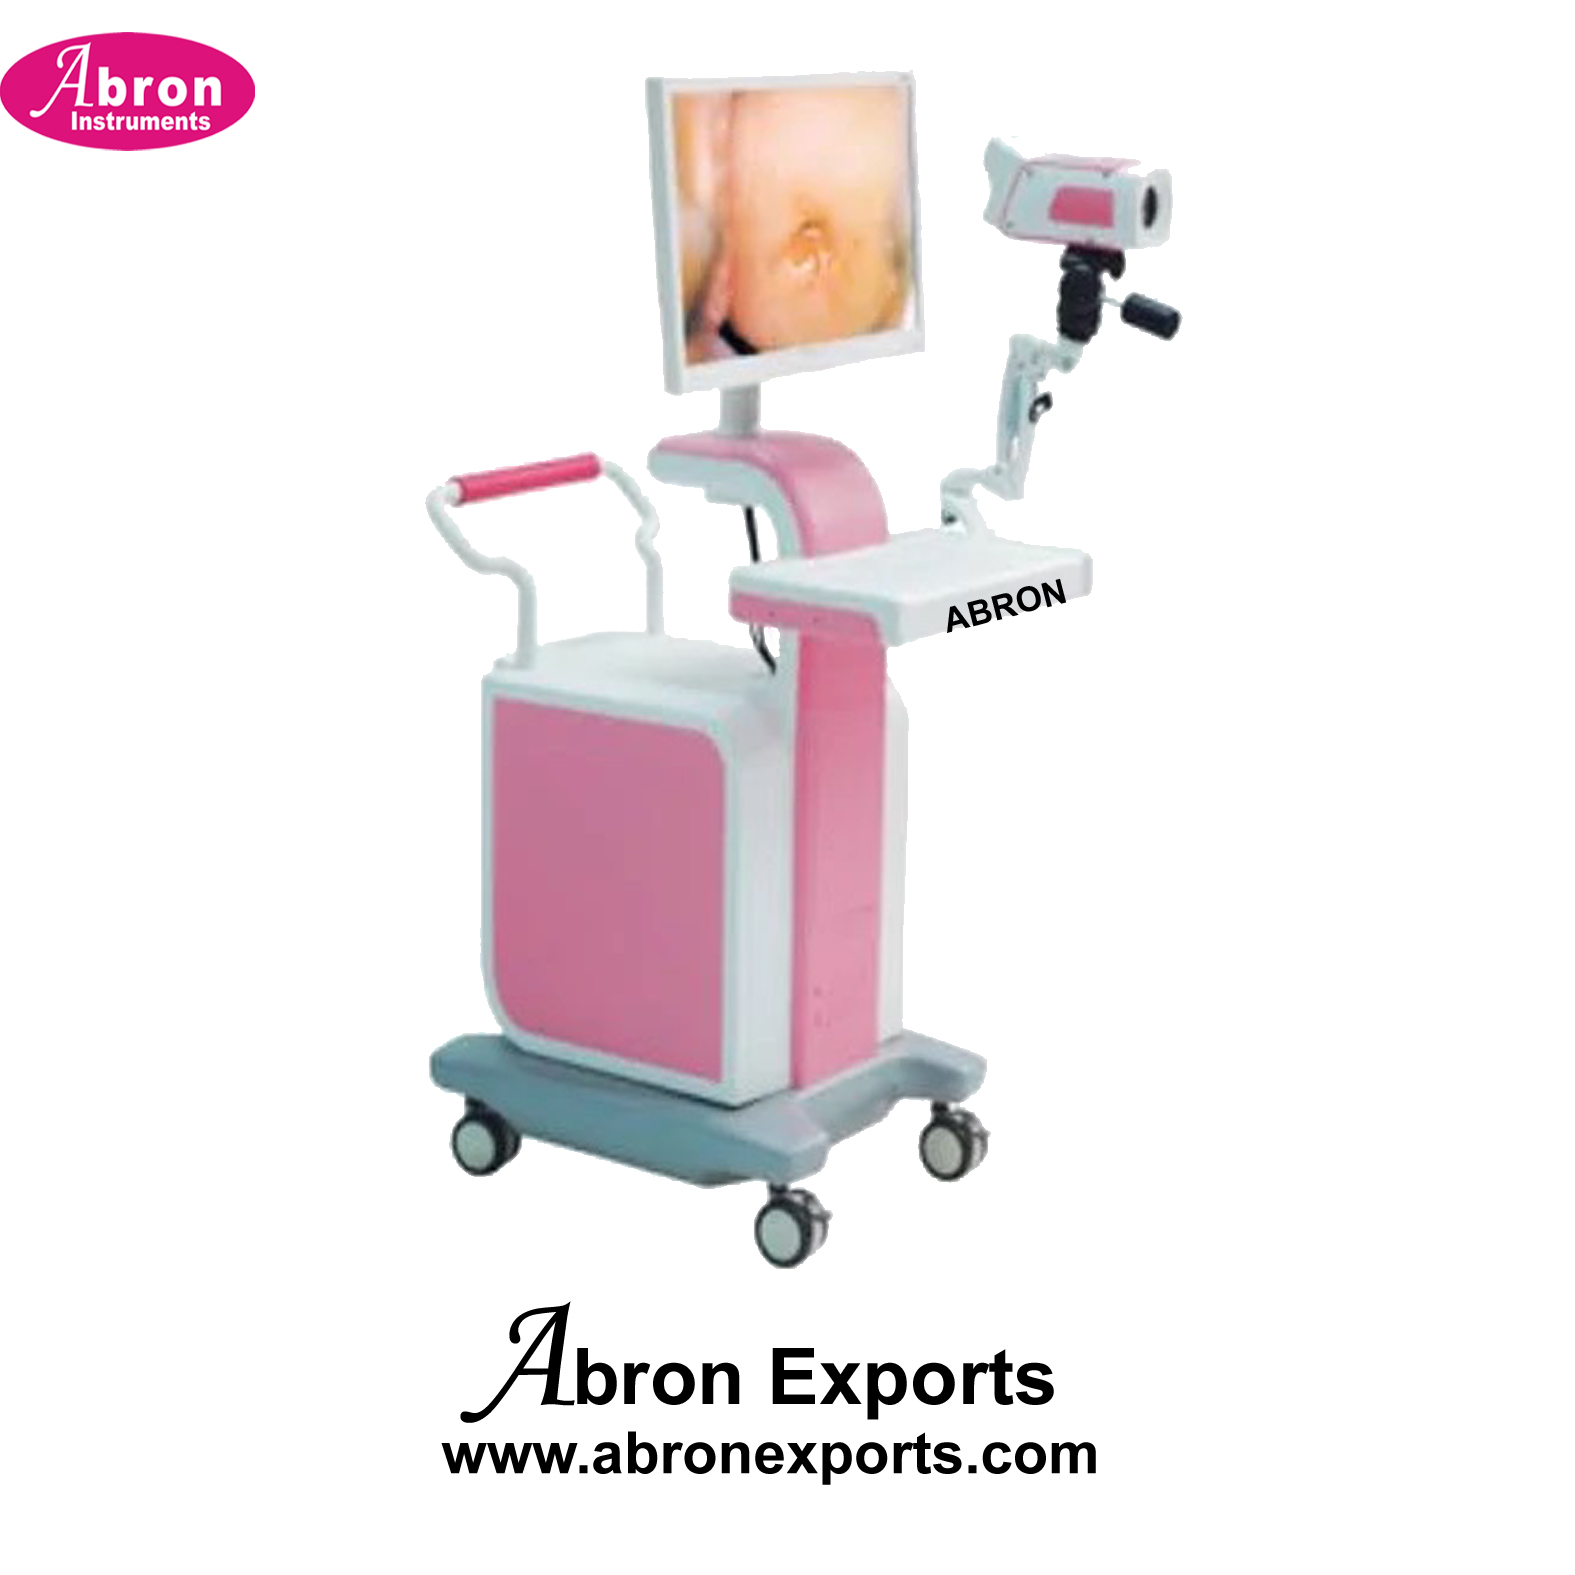 Gynecology Digital Video Colposcope with Reporting with continuous zoom to 40x with 2 outputs Abron ABM-2904A40X 